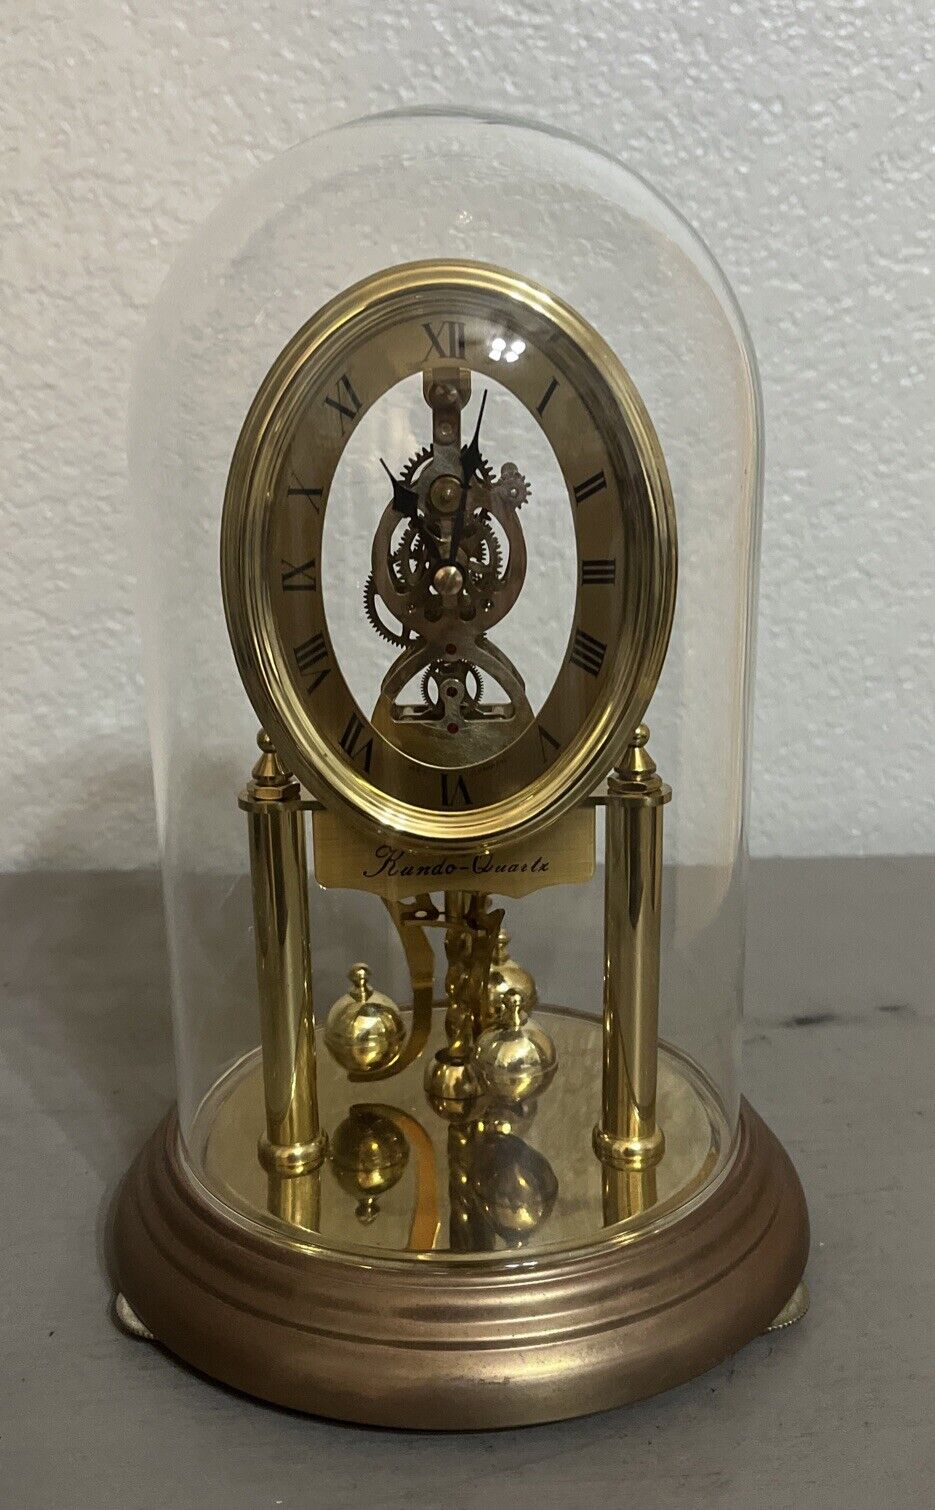 Vintage Kundo Anniversary Clock West Germany Glass Dome Battery Operated